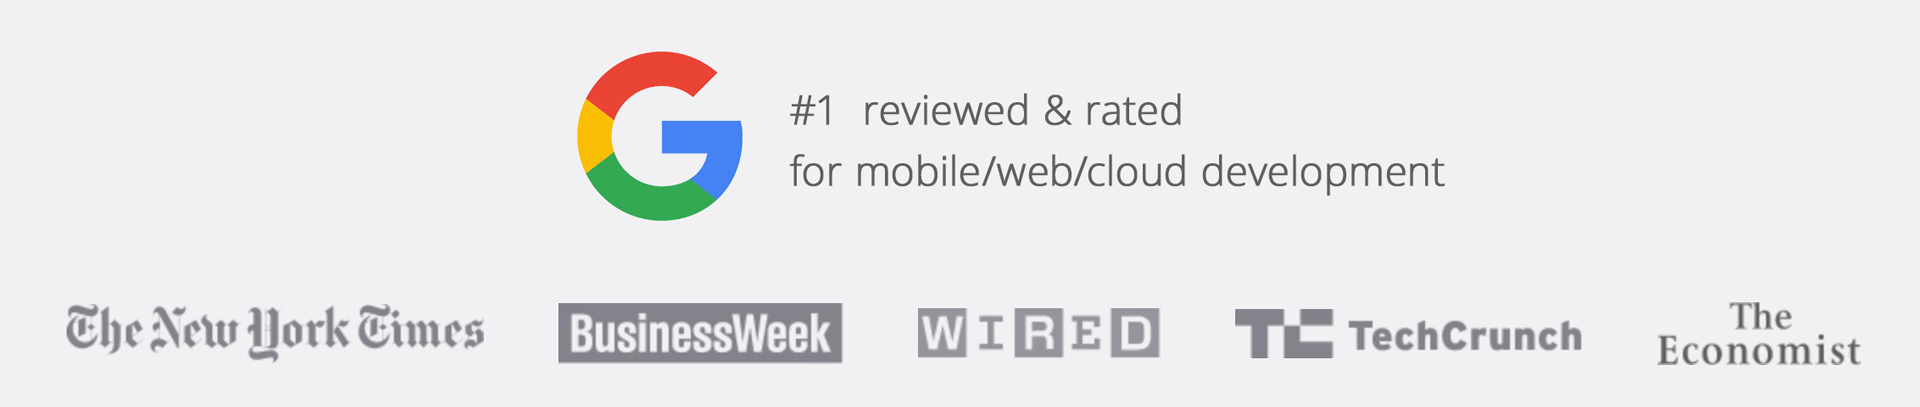 Googles #1 Reviewed & Rated Web and App Development Company